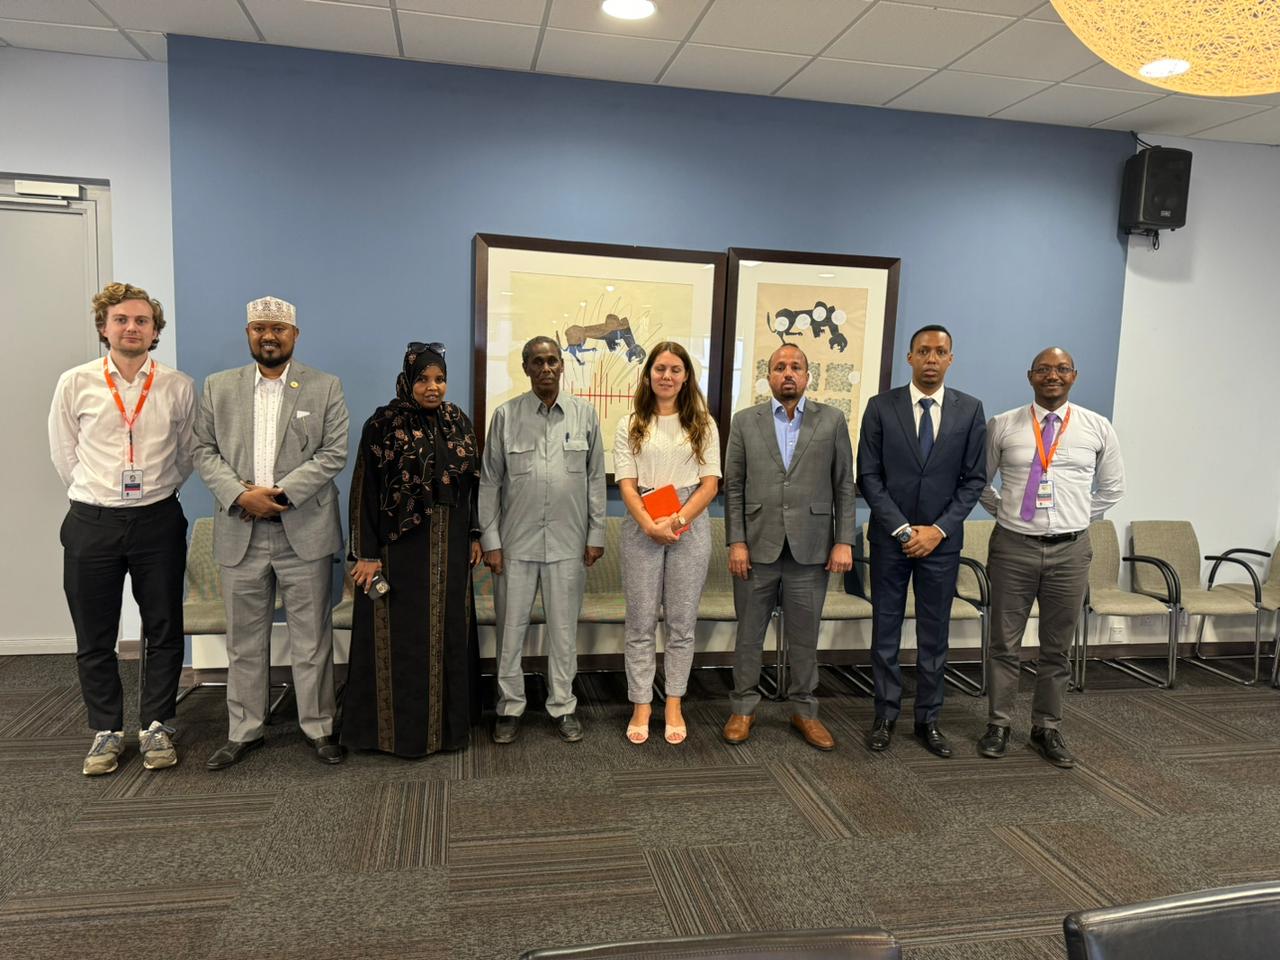 MP ABIB AND THE HORN AND EAST AFRICA PARLIAMENTARY INSTITUTE SEND SOMALI PARLIAMENTERIANS TO THE NETHERLANDS TO RECEIVE TRAINING FROM THE INTERNATIONAL COURT OF JUSTICE